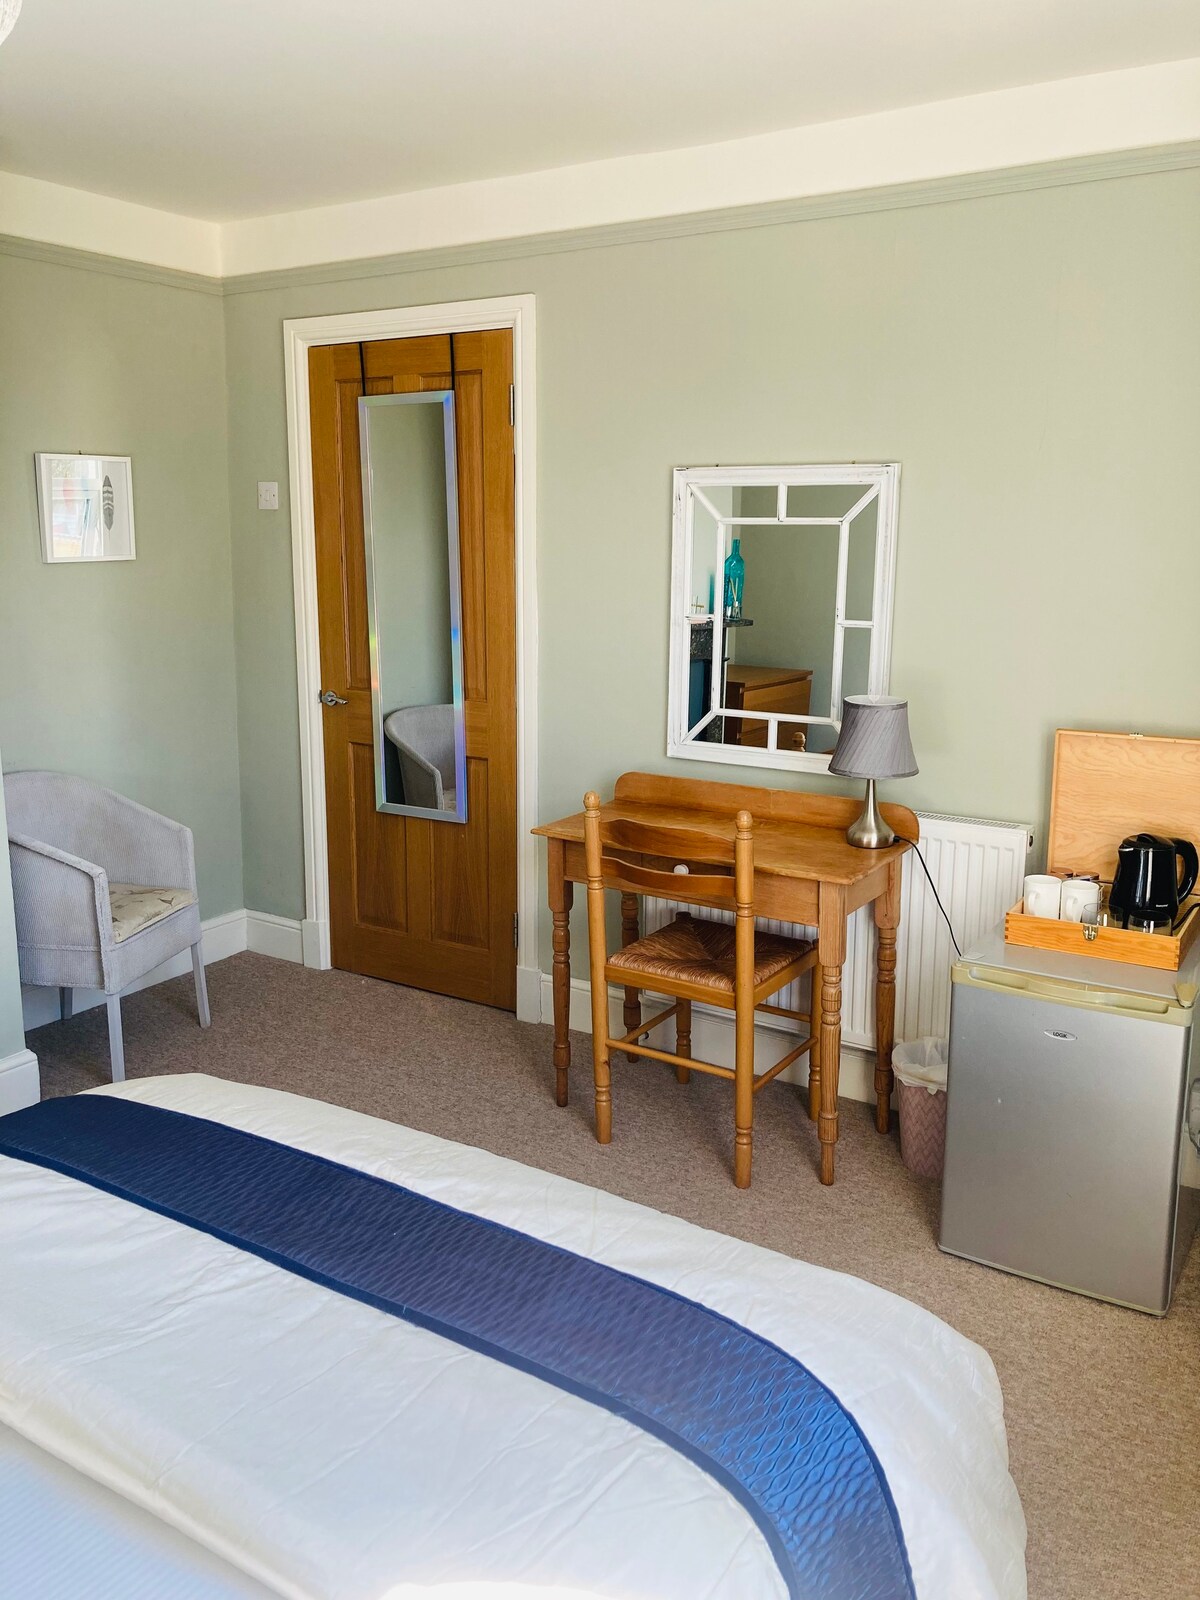 Welcoming Host, with spacious double room